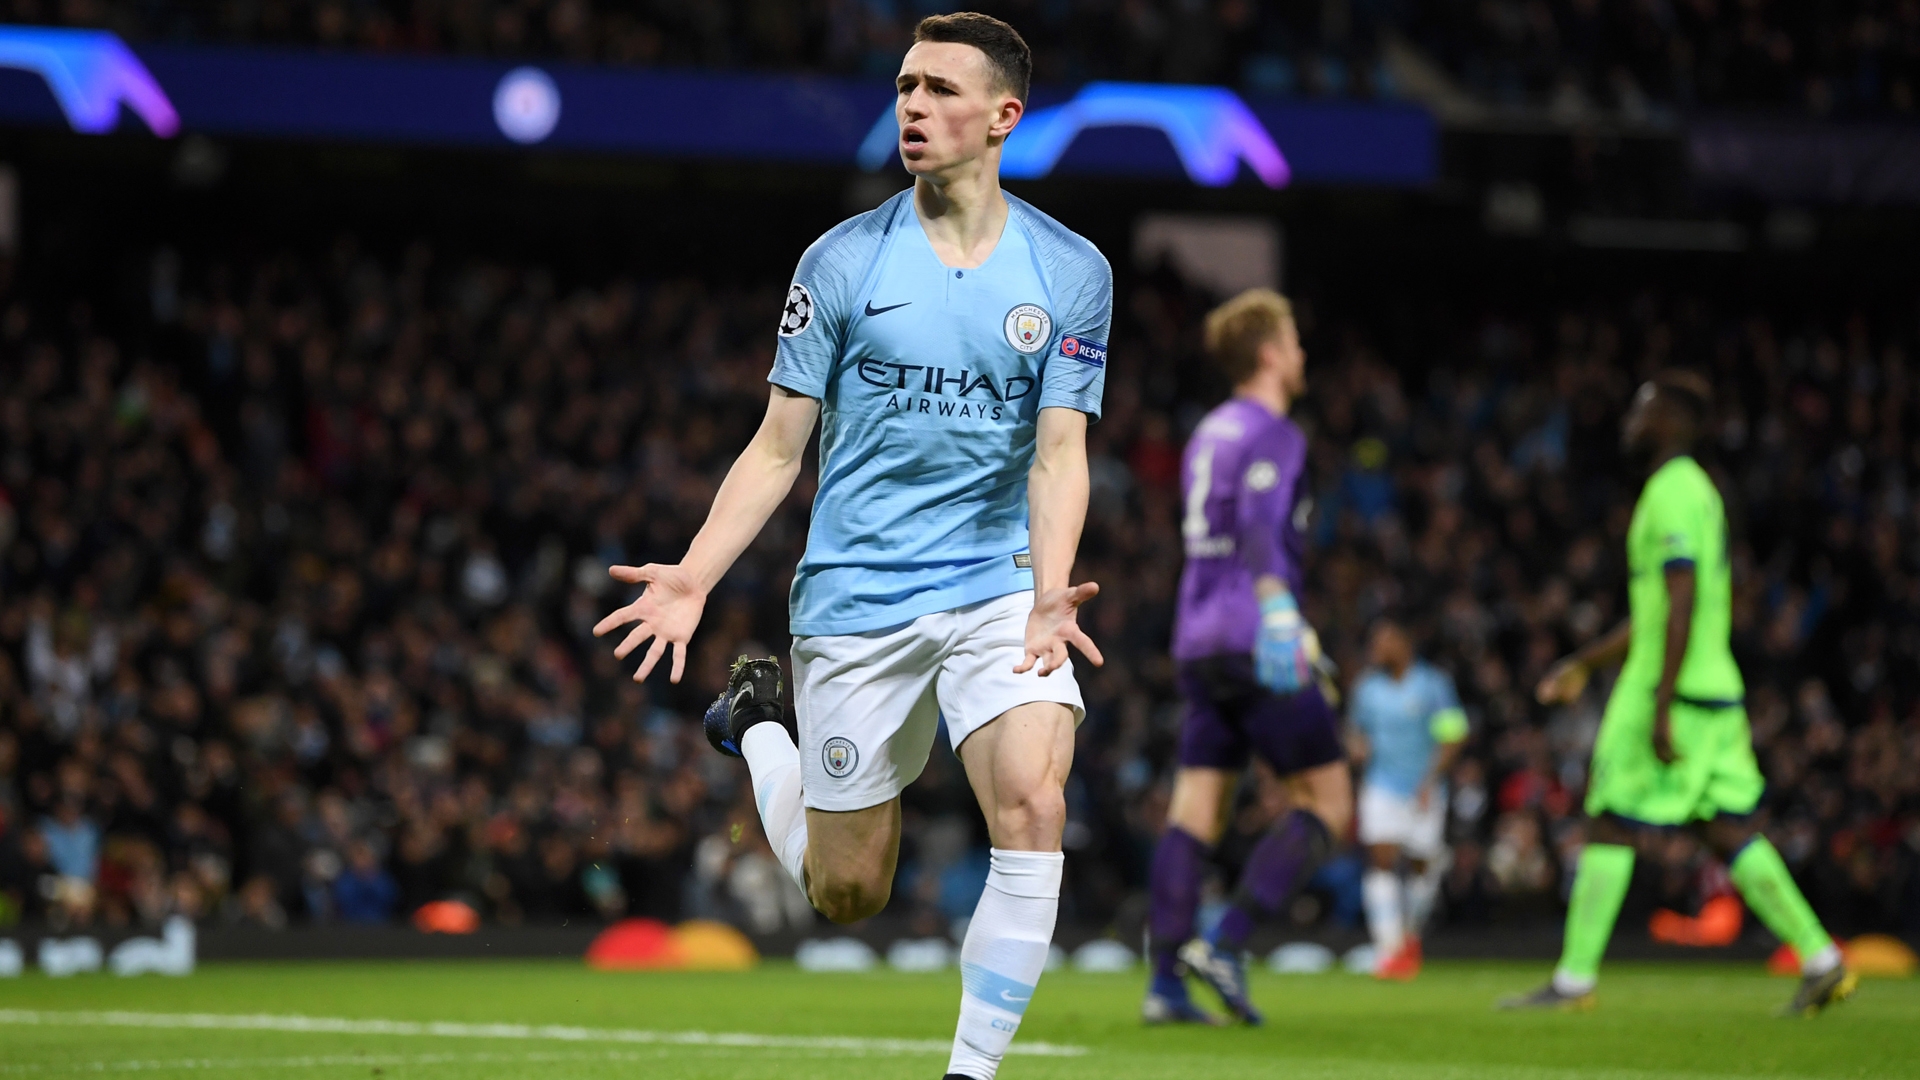 Manchester City: Foden going nowhere, says Guardiola